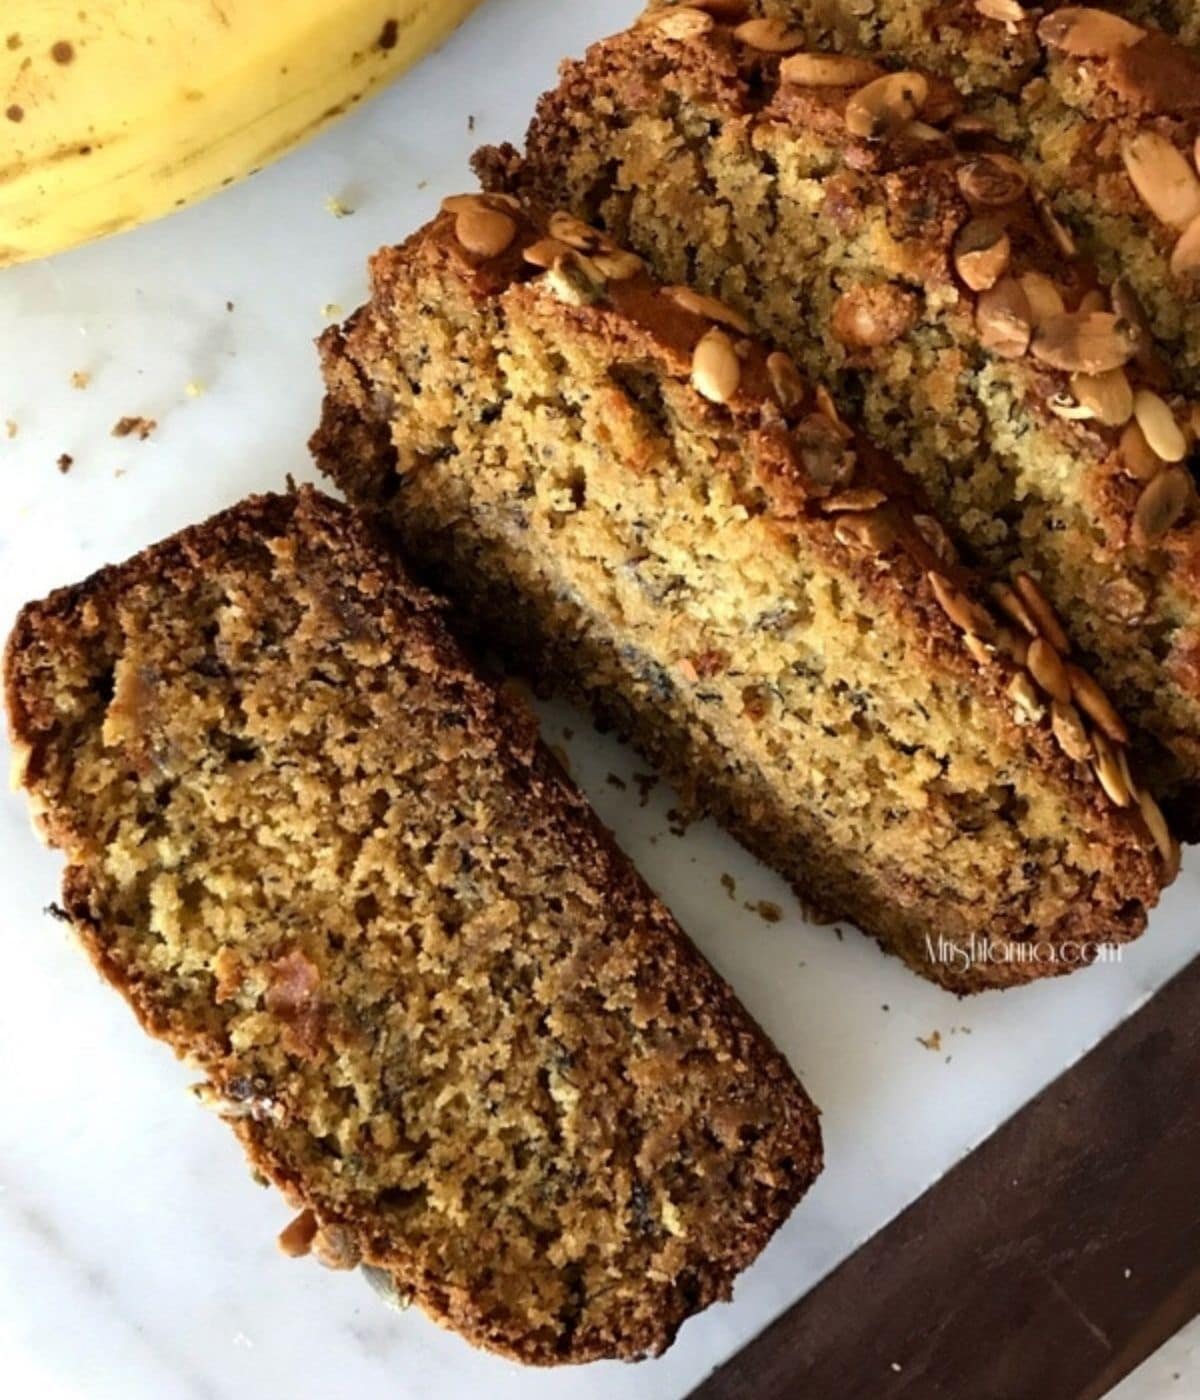 Sliced banana bread is placed on the white serving tray